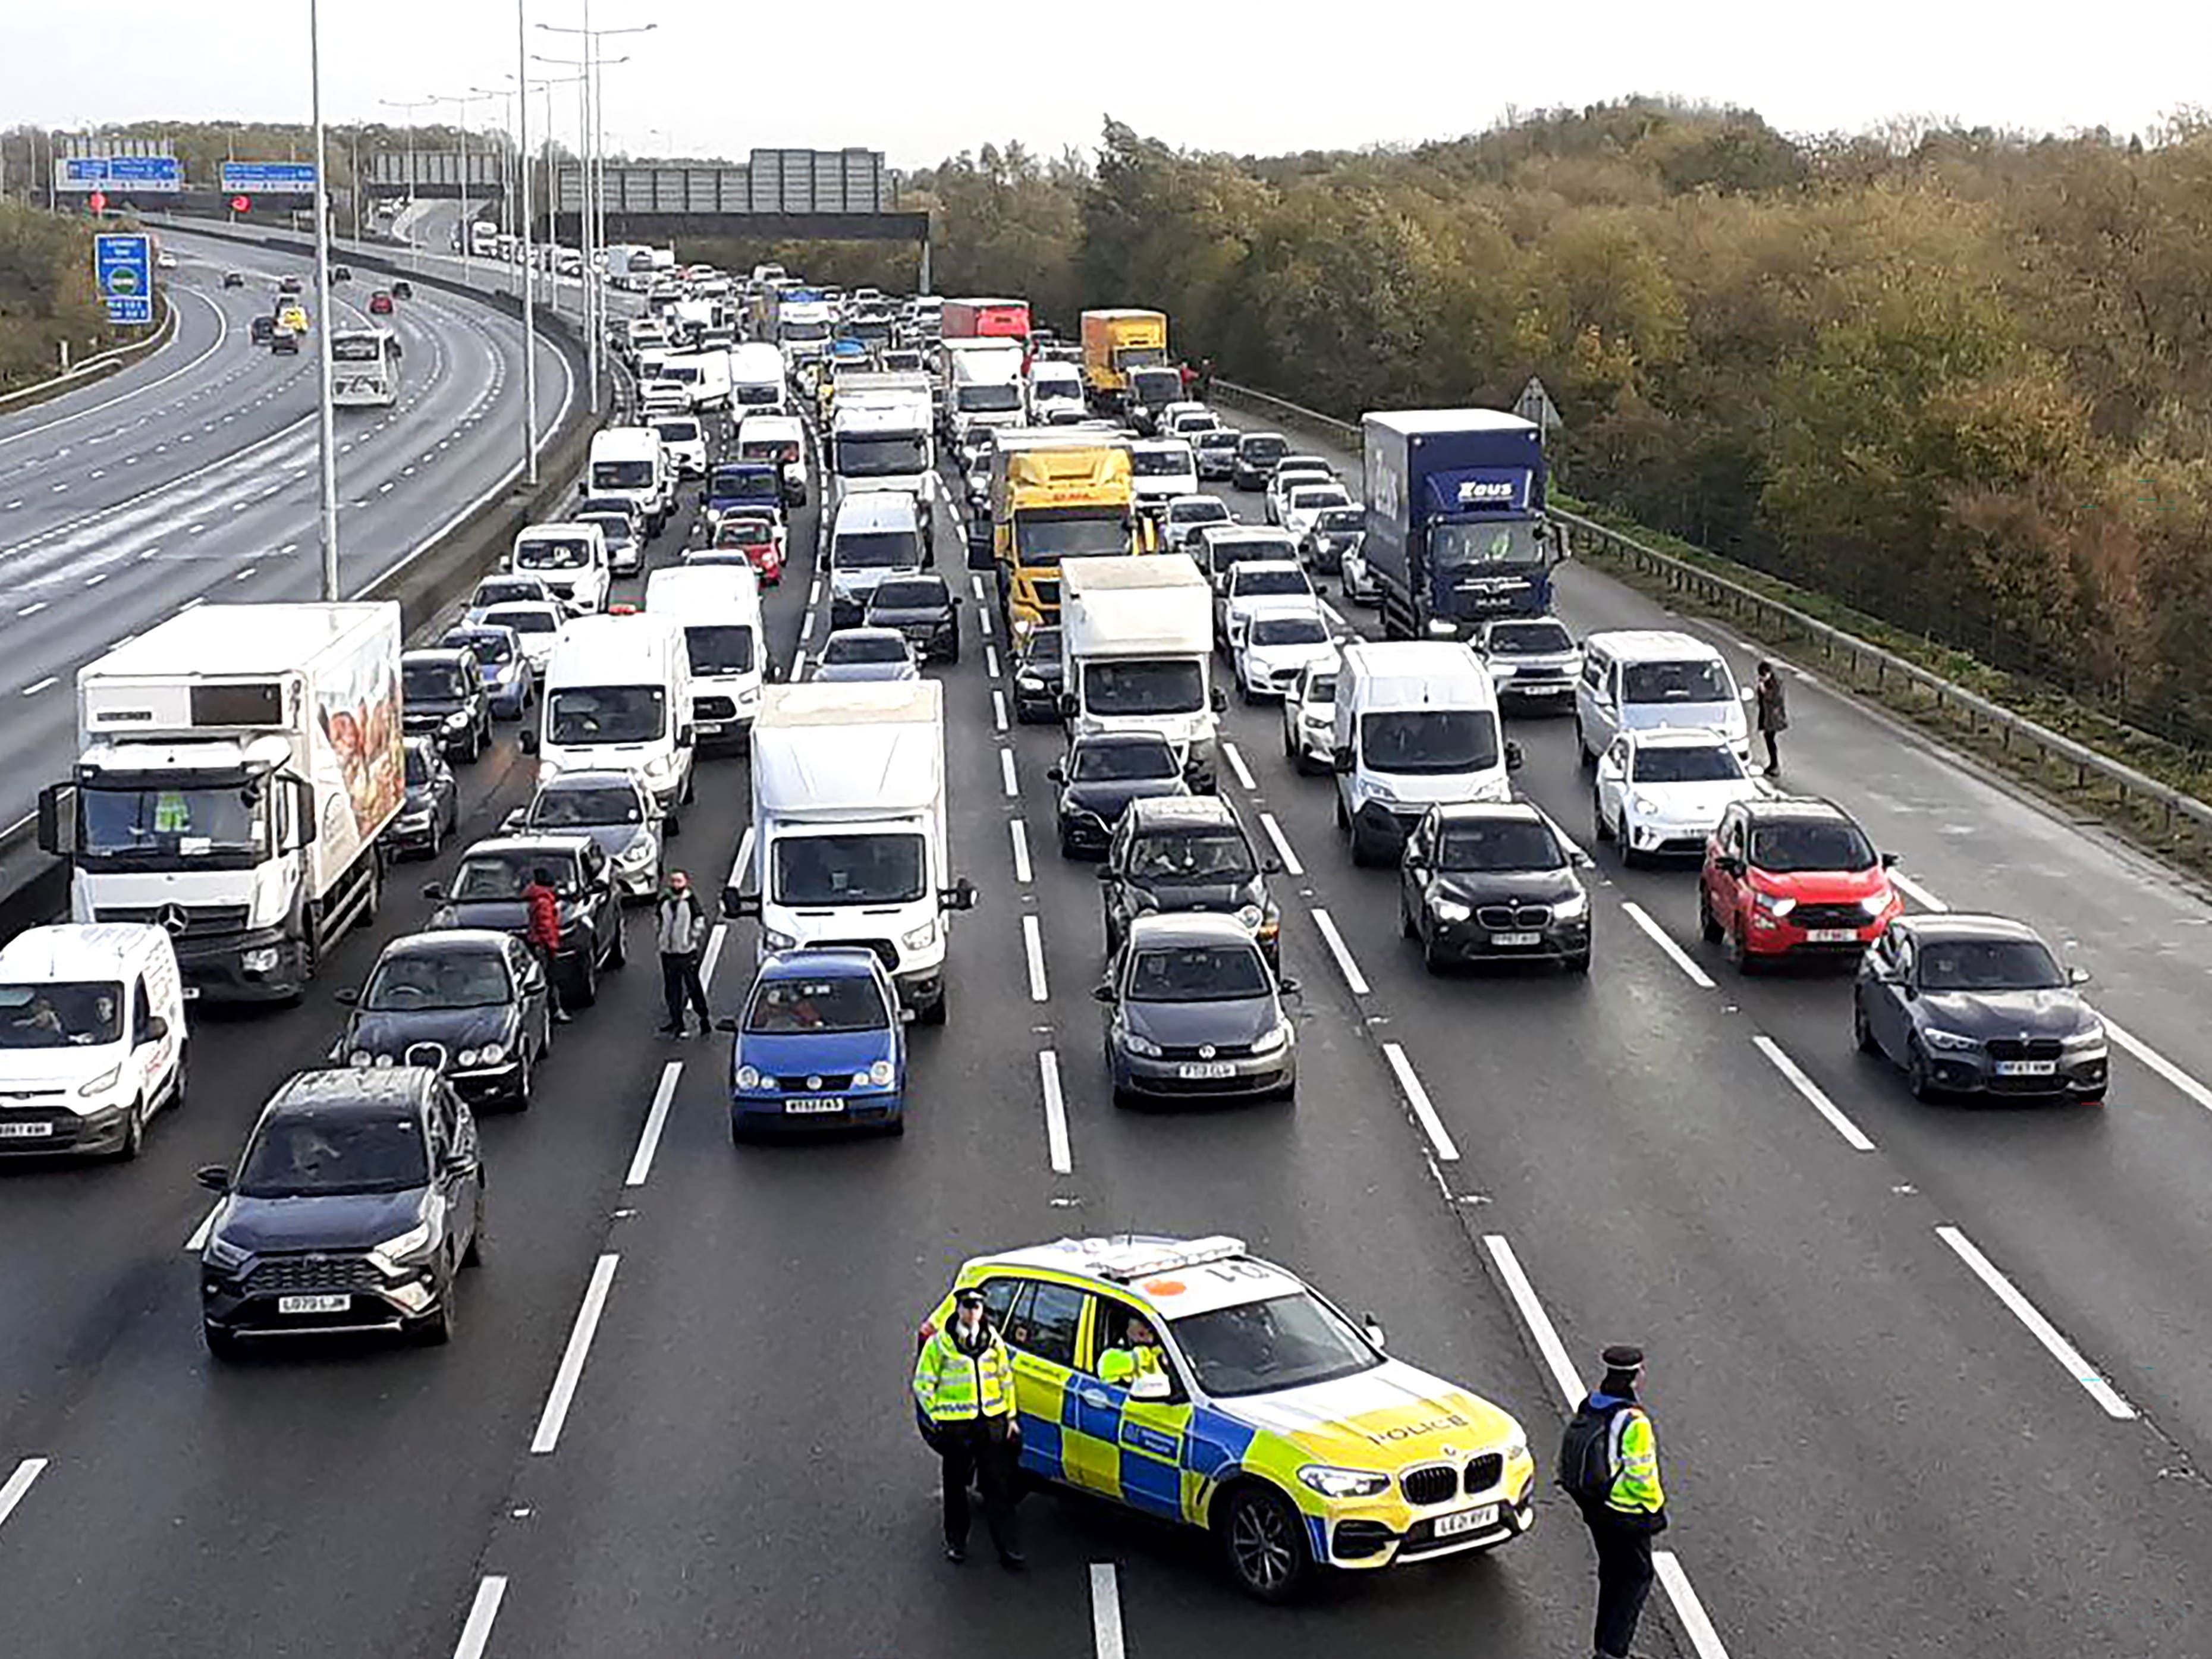 Five Just Stop Oil activists jailed over protest that caused delays on M25